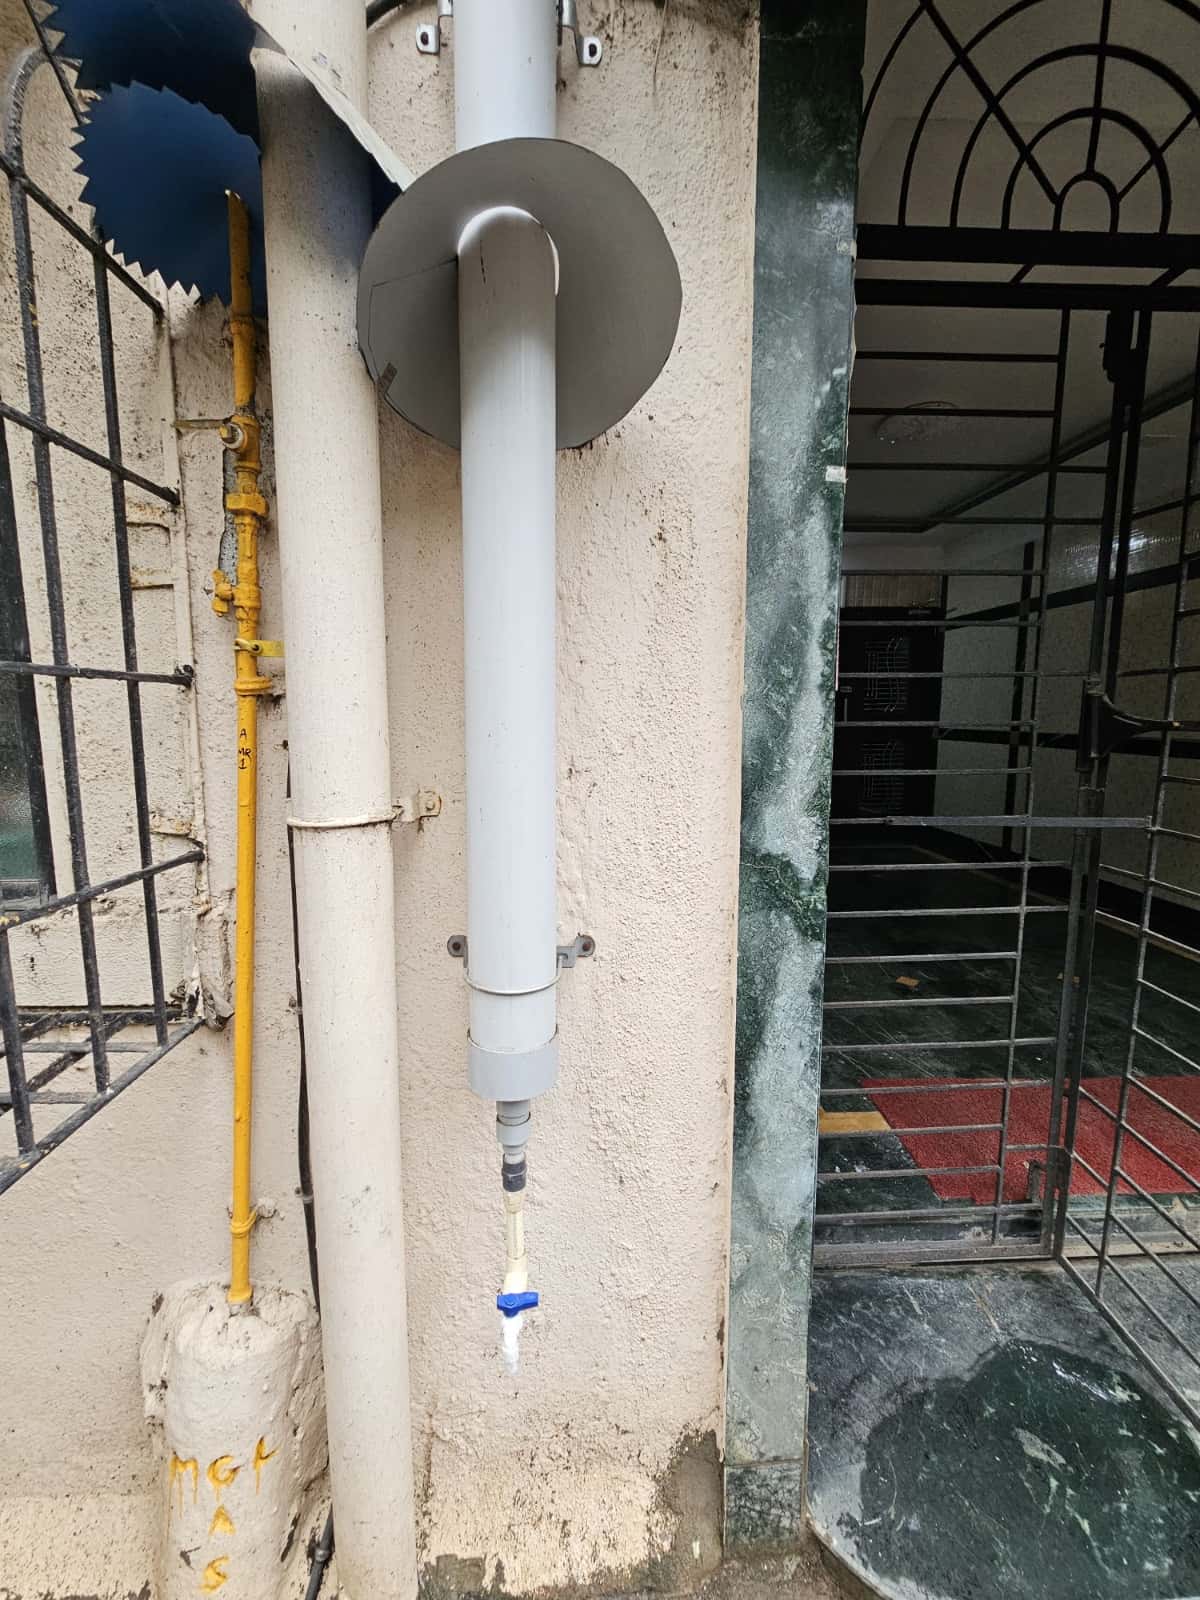 This pipe collects AC condensate water